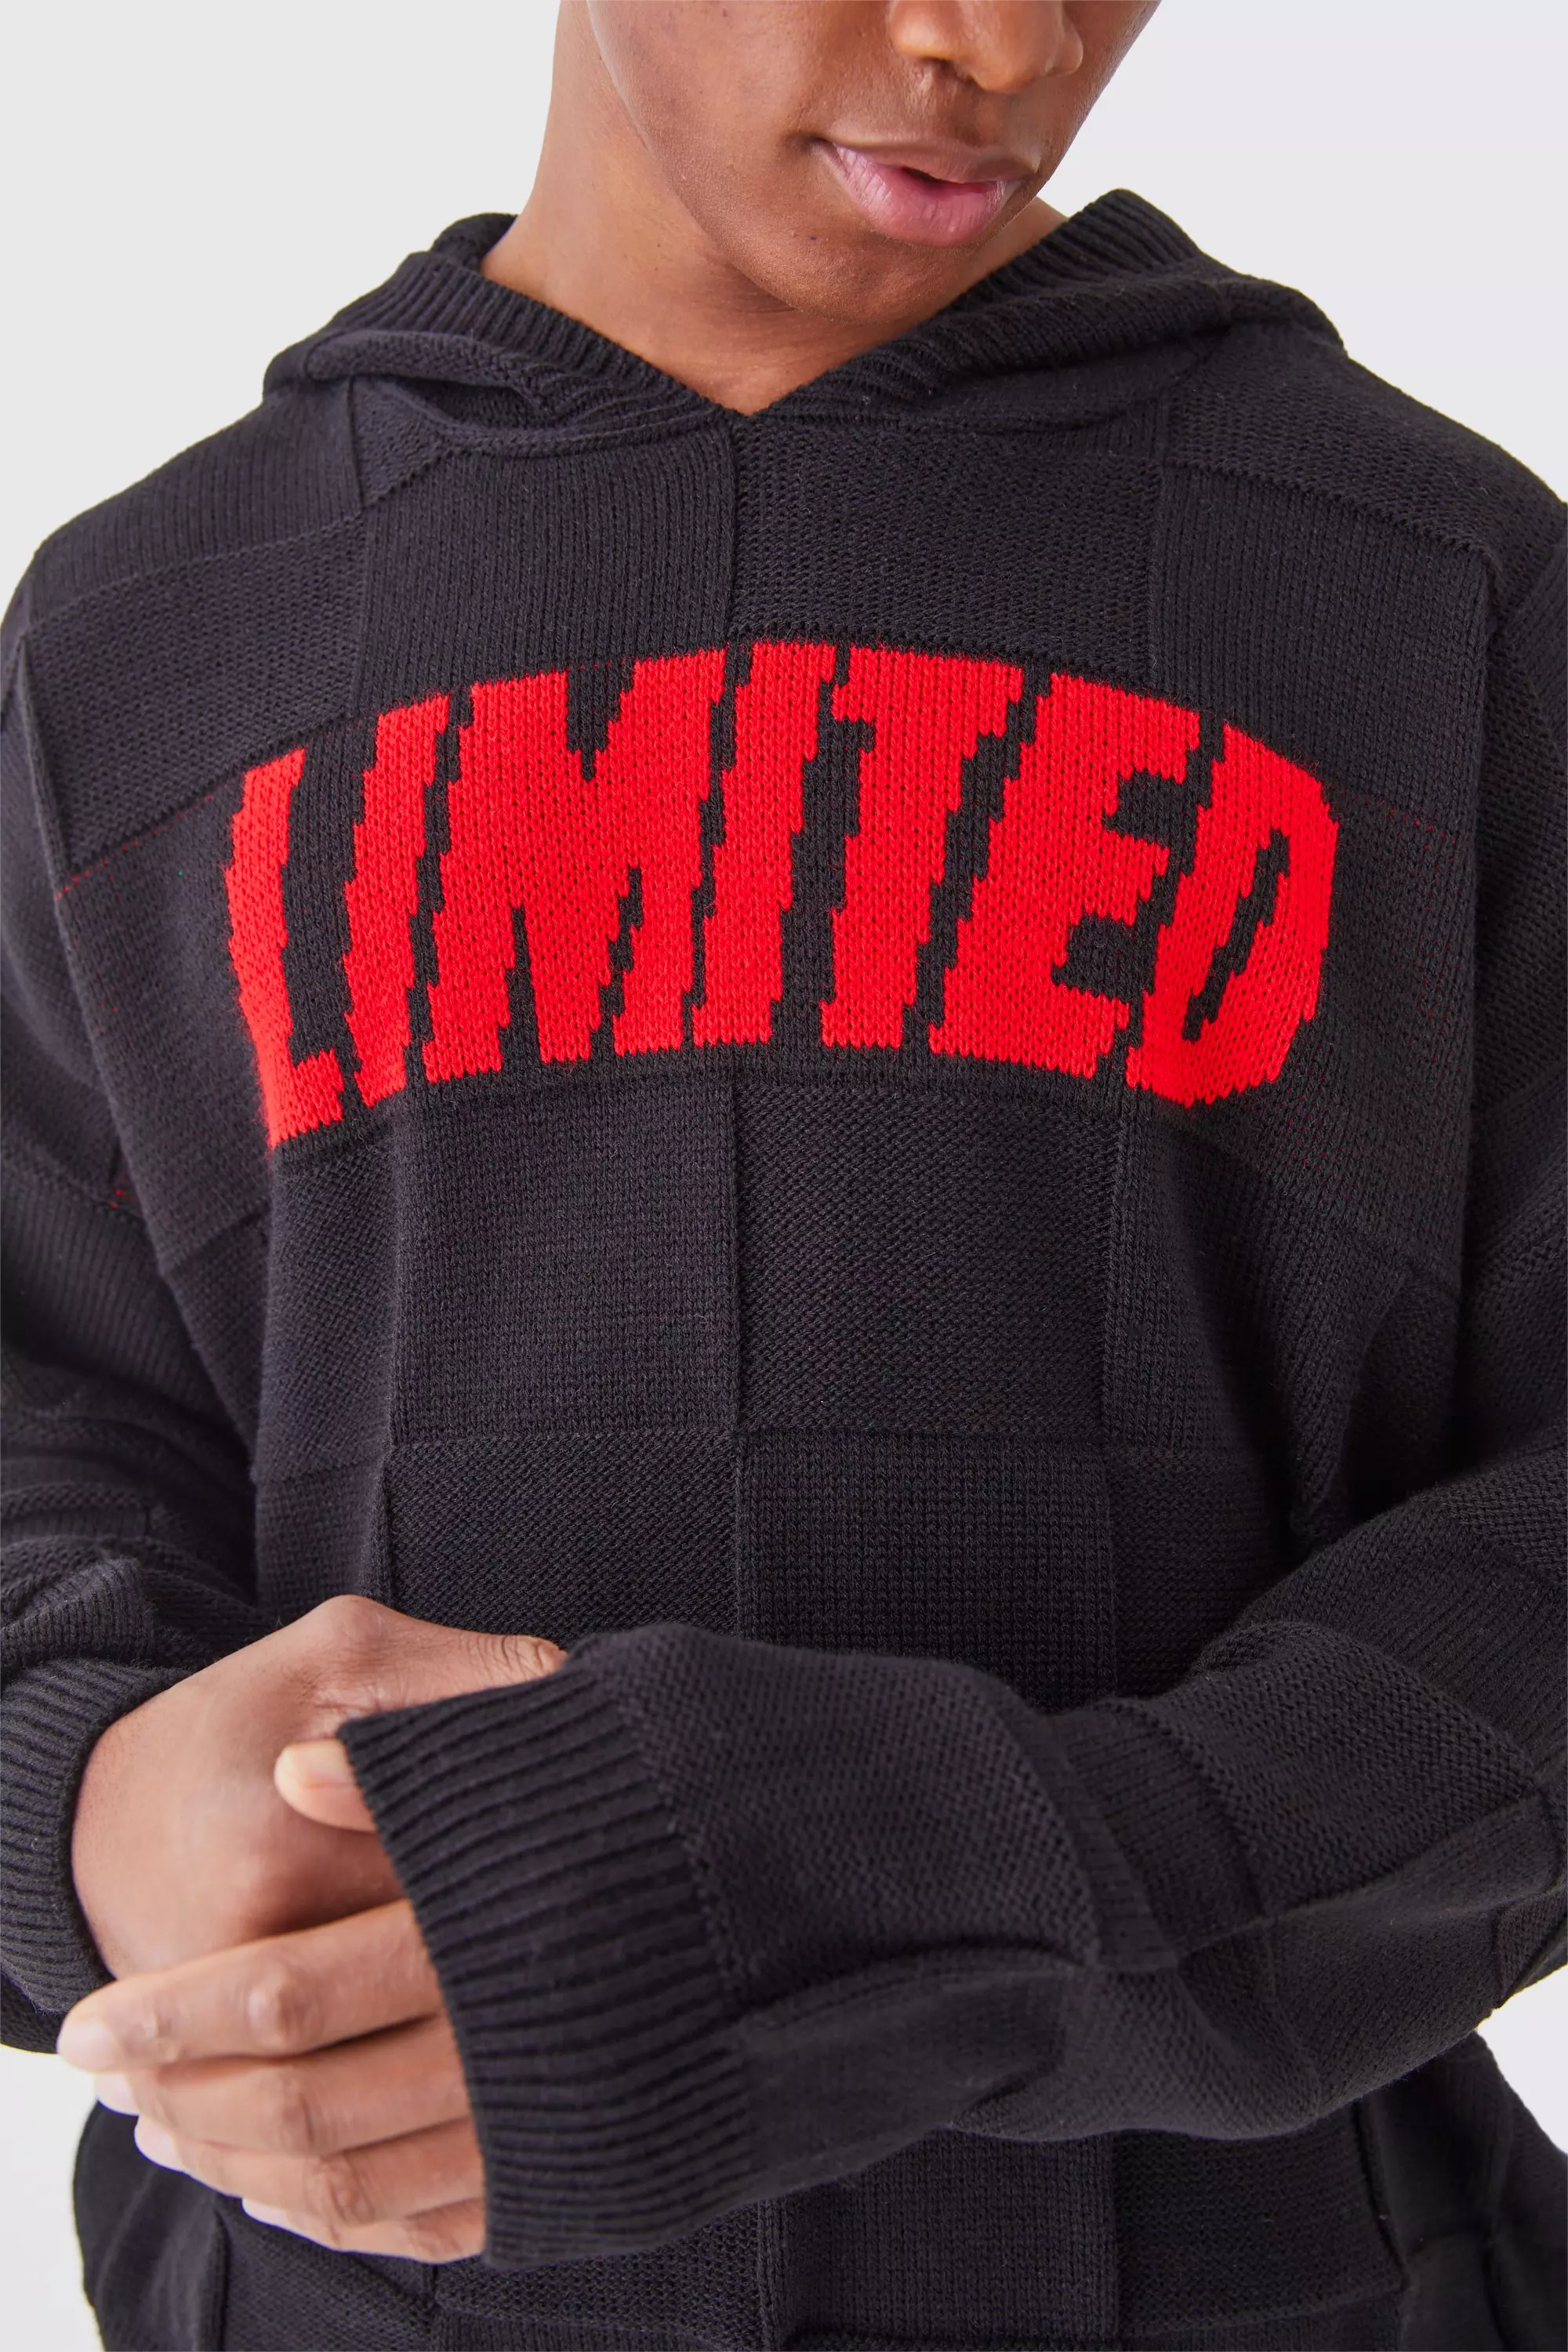 Oversized Textured Knitted Branded Hoodie Black